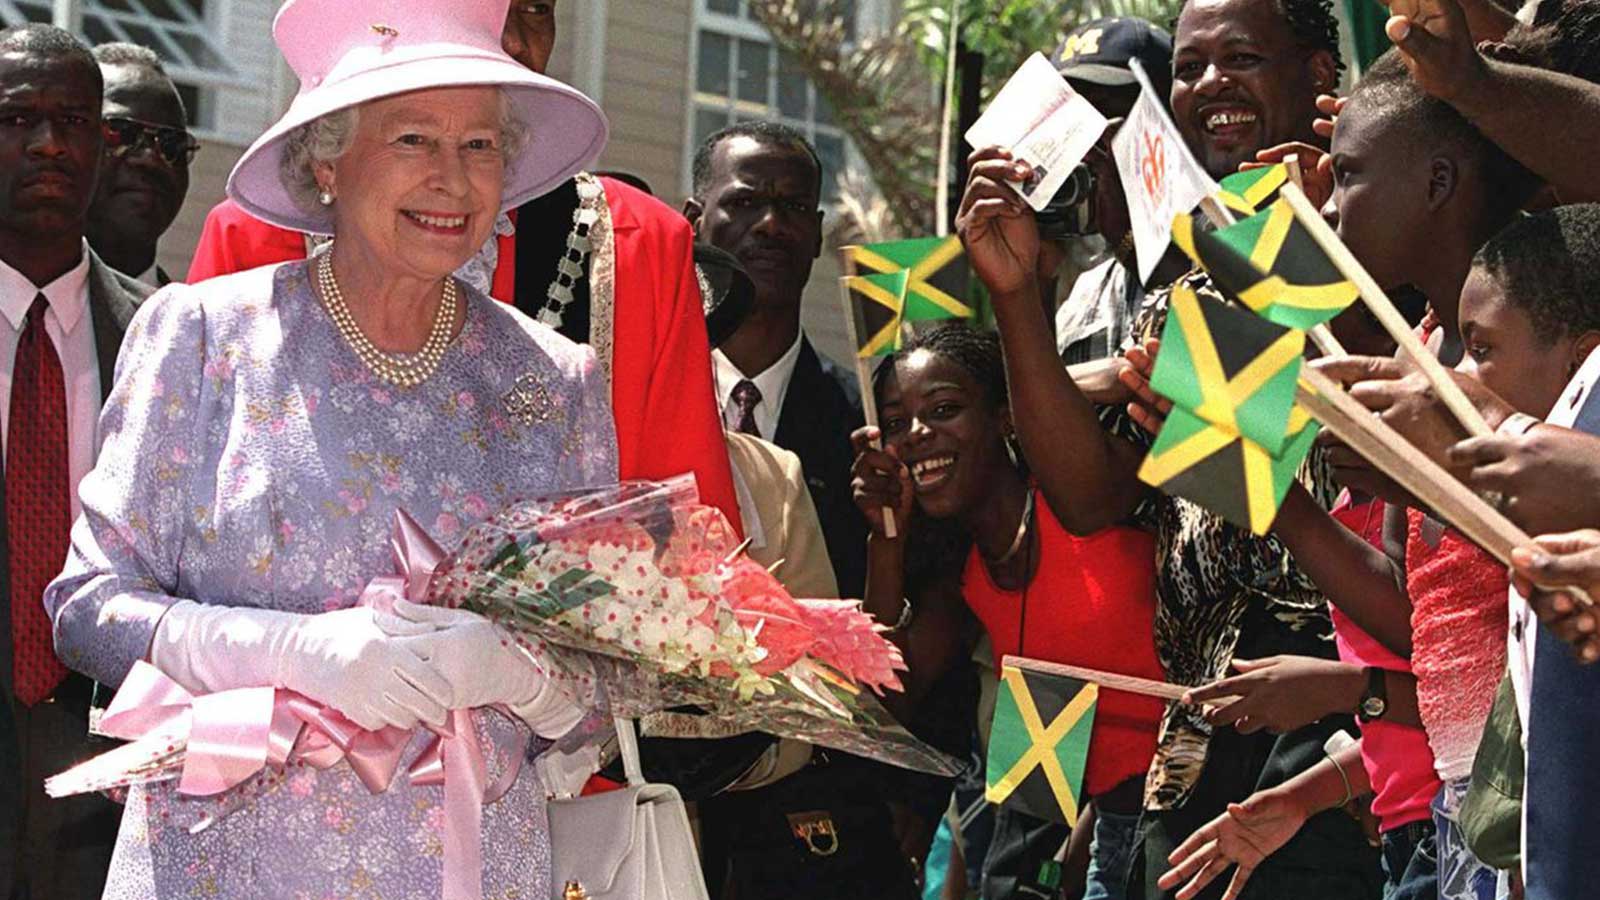 Jamaica is preparing to remove Queen Elizabeth II as its head of state, reports say